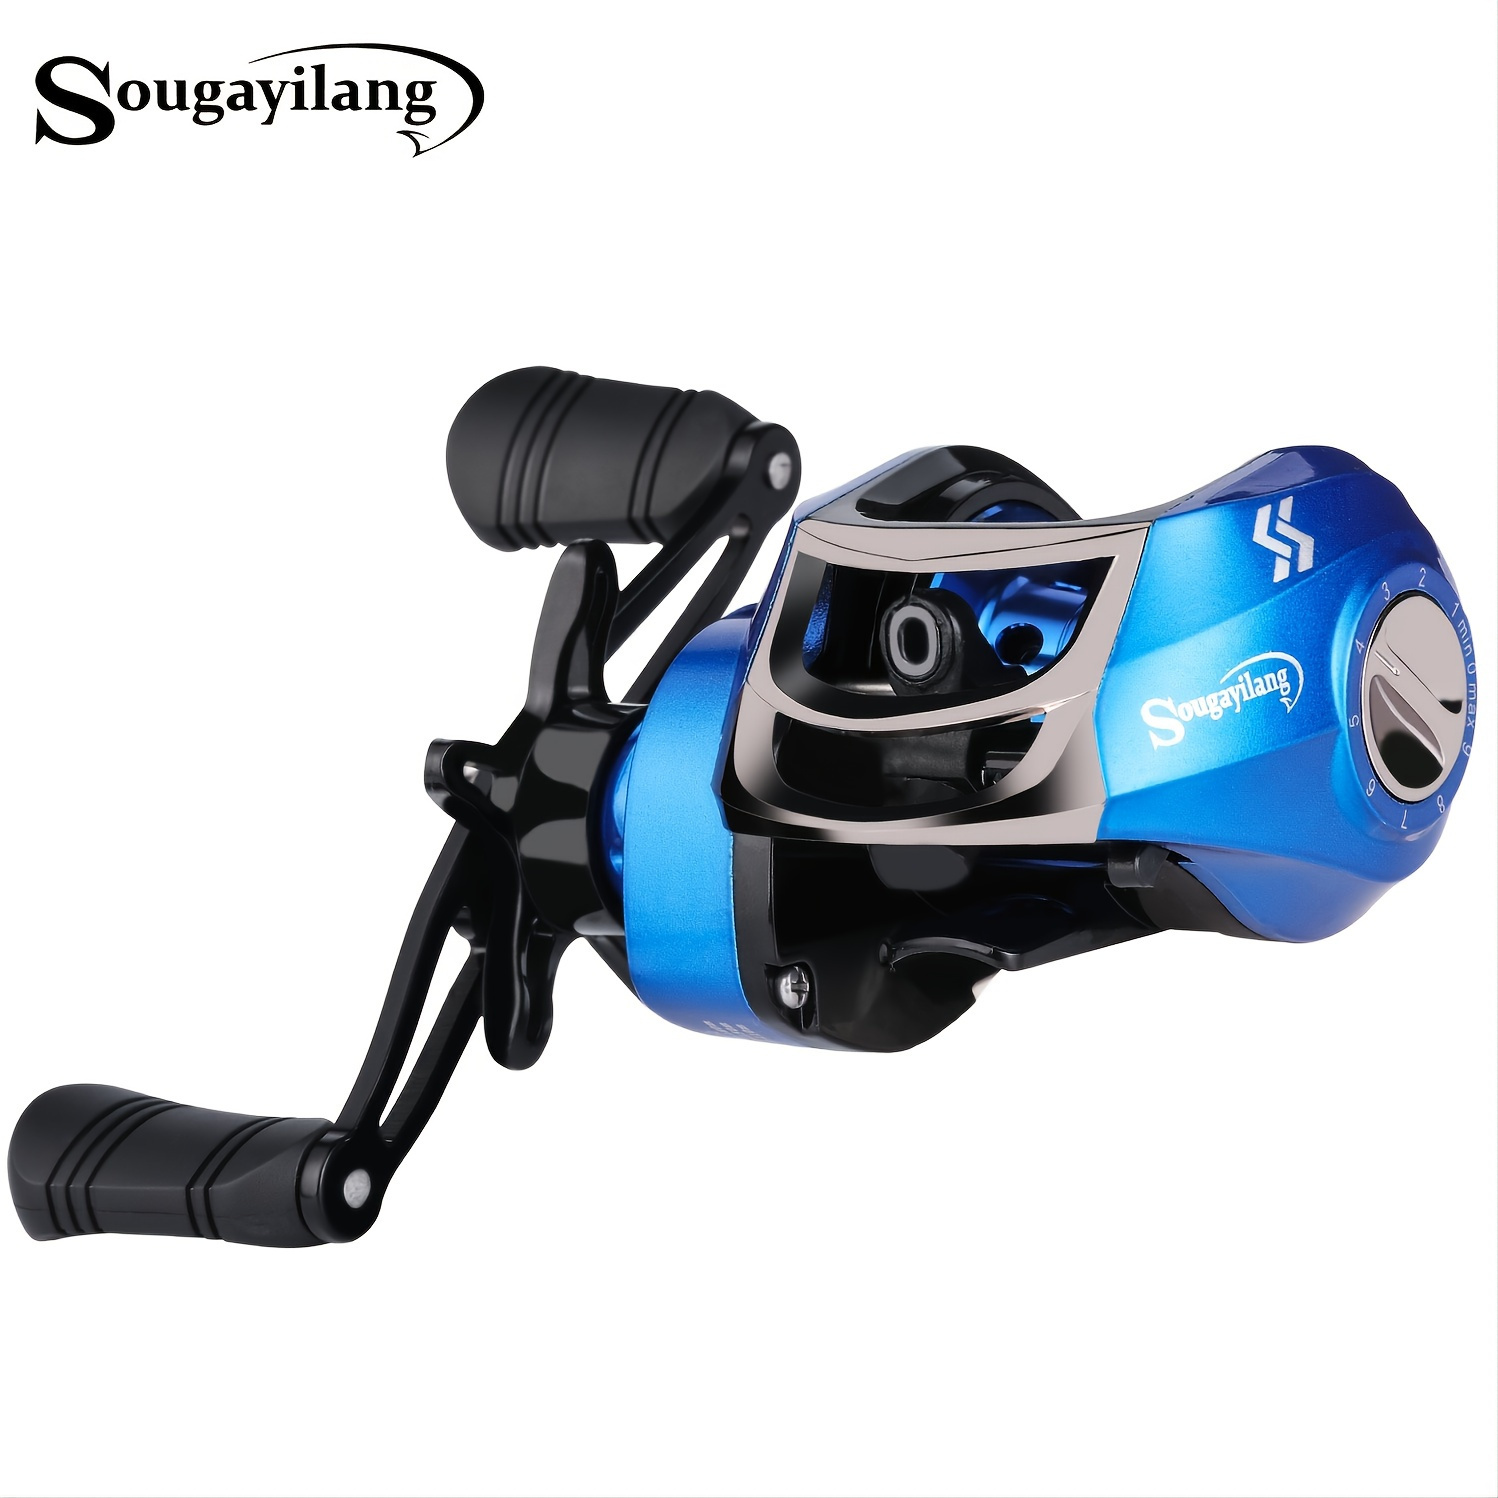 Sougayilang New Baitcasting Reel 7.2:1 High Speed 18+1BB with EVA Handle  for Casting Rod In Fresh Environment 48Hours Cheap Reel - AliExpress